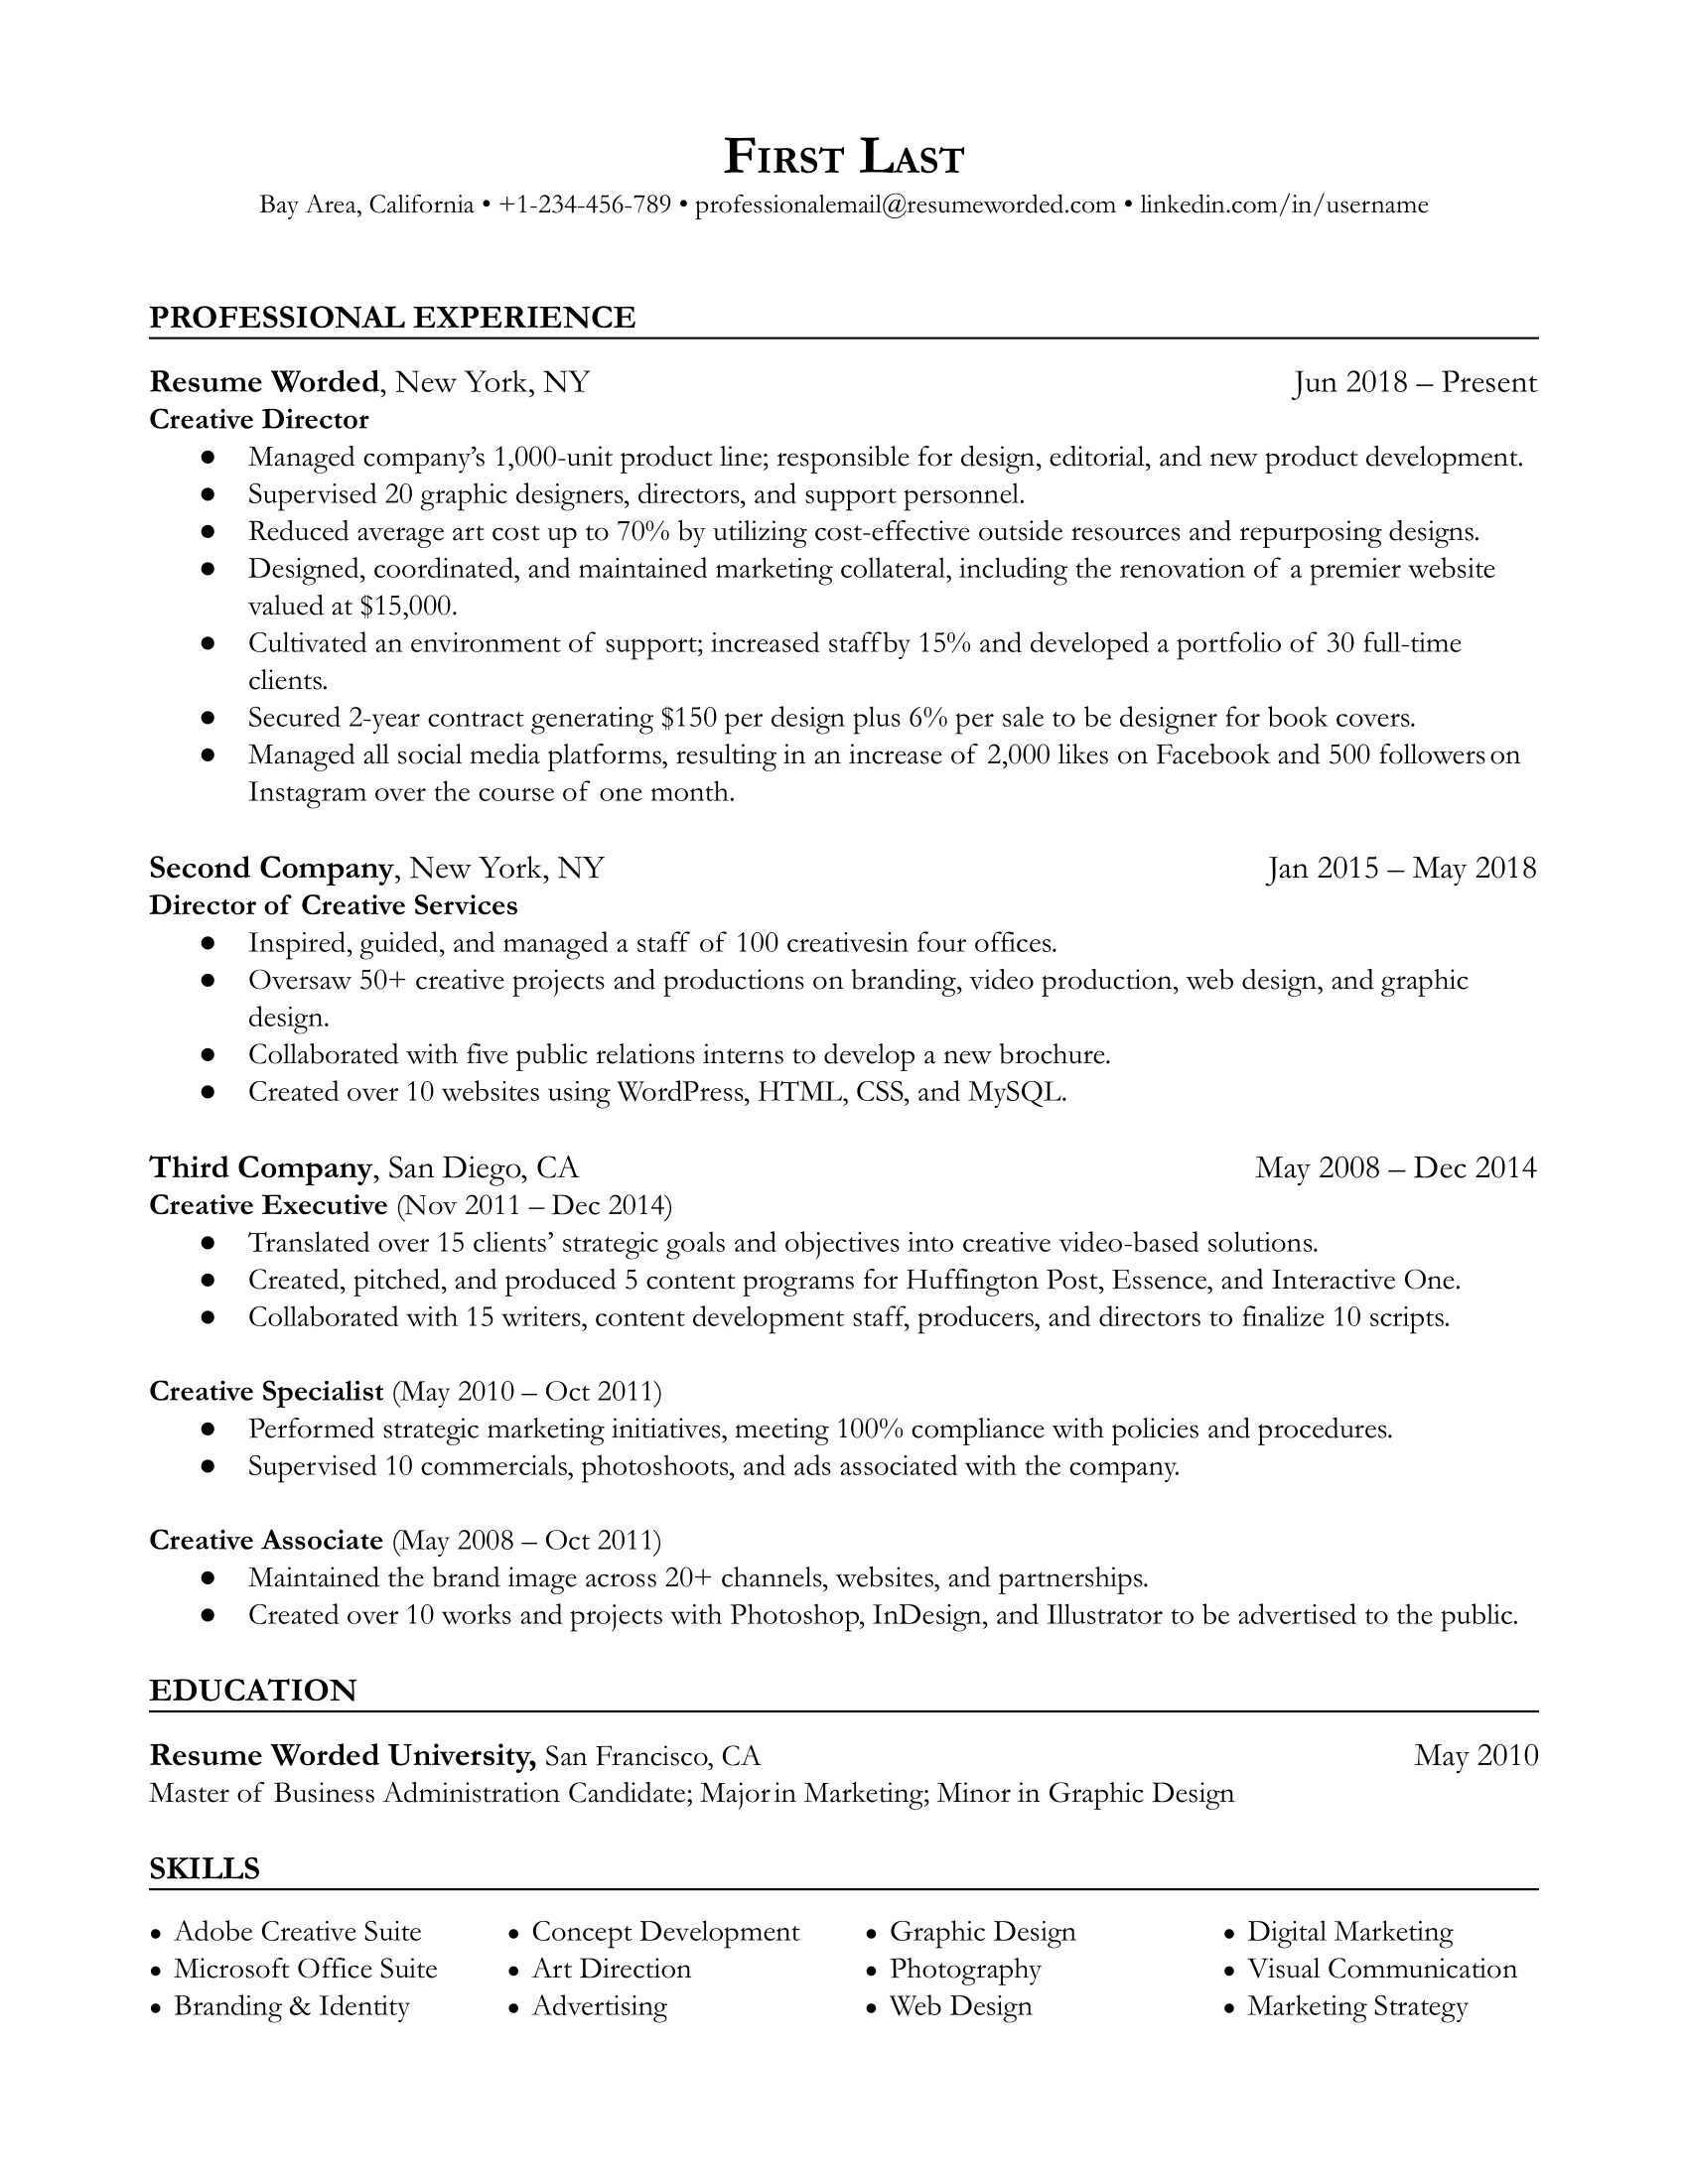 A creative director resume template including relevant certifications. 